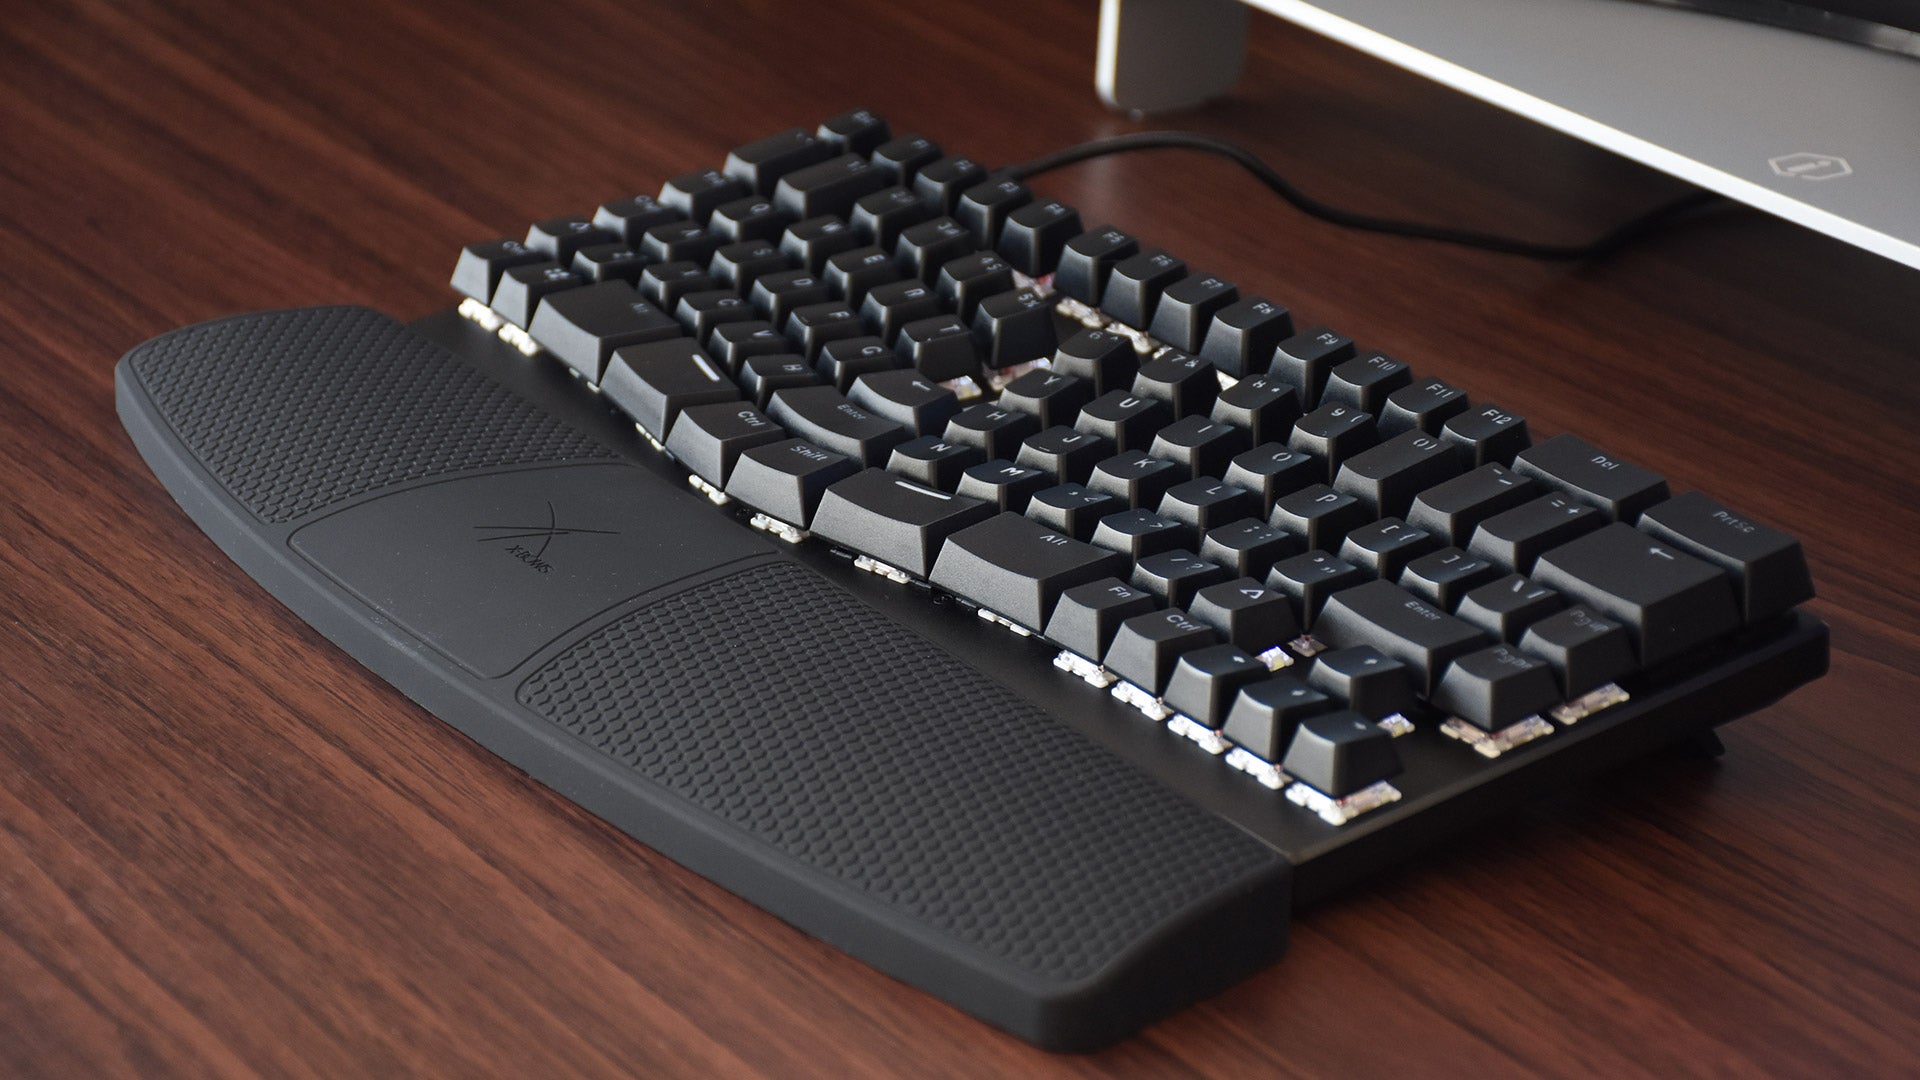 X-Bows Wrist Rest and Lite Keyboard